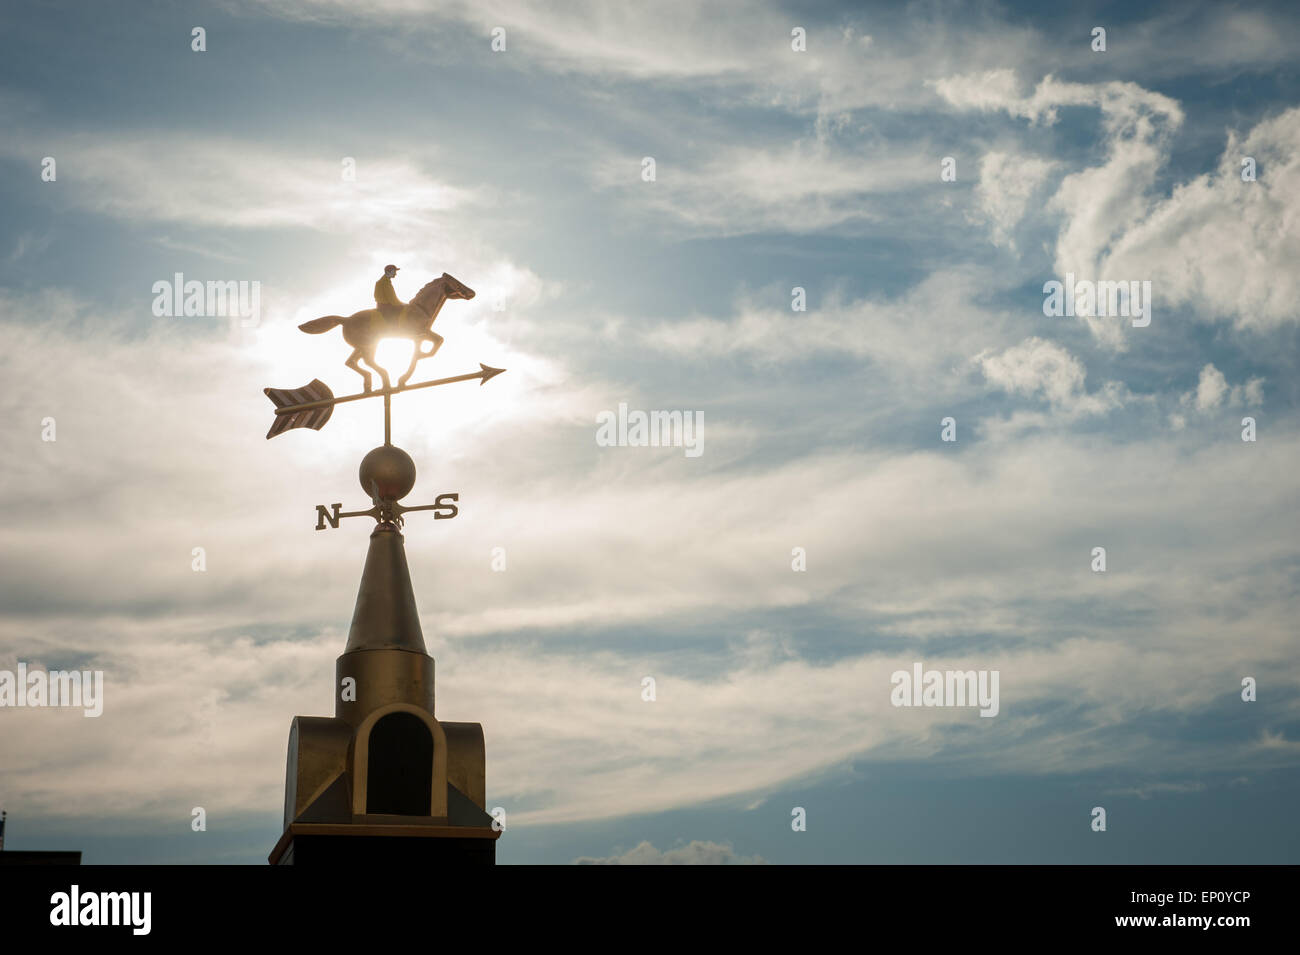 Weather vane of a jockey on a horse in Baltimore, Maryland, USA Stock Photo